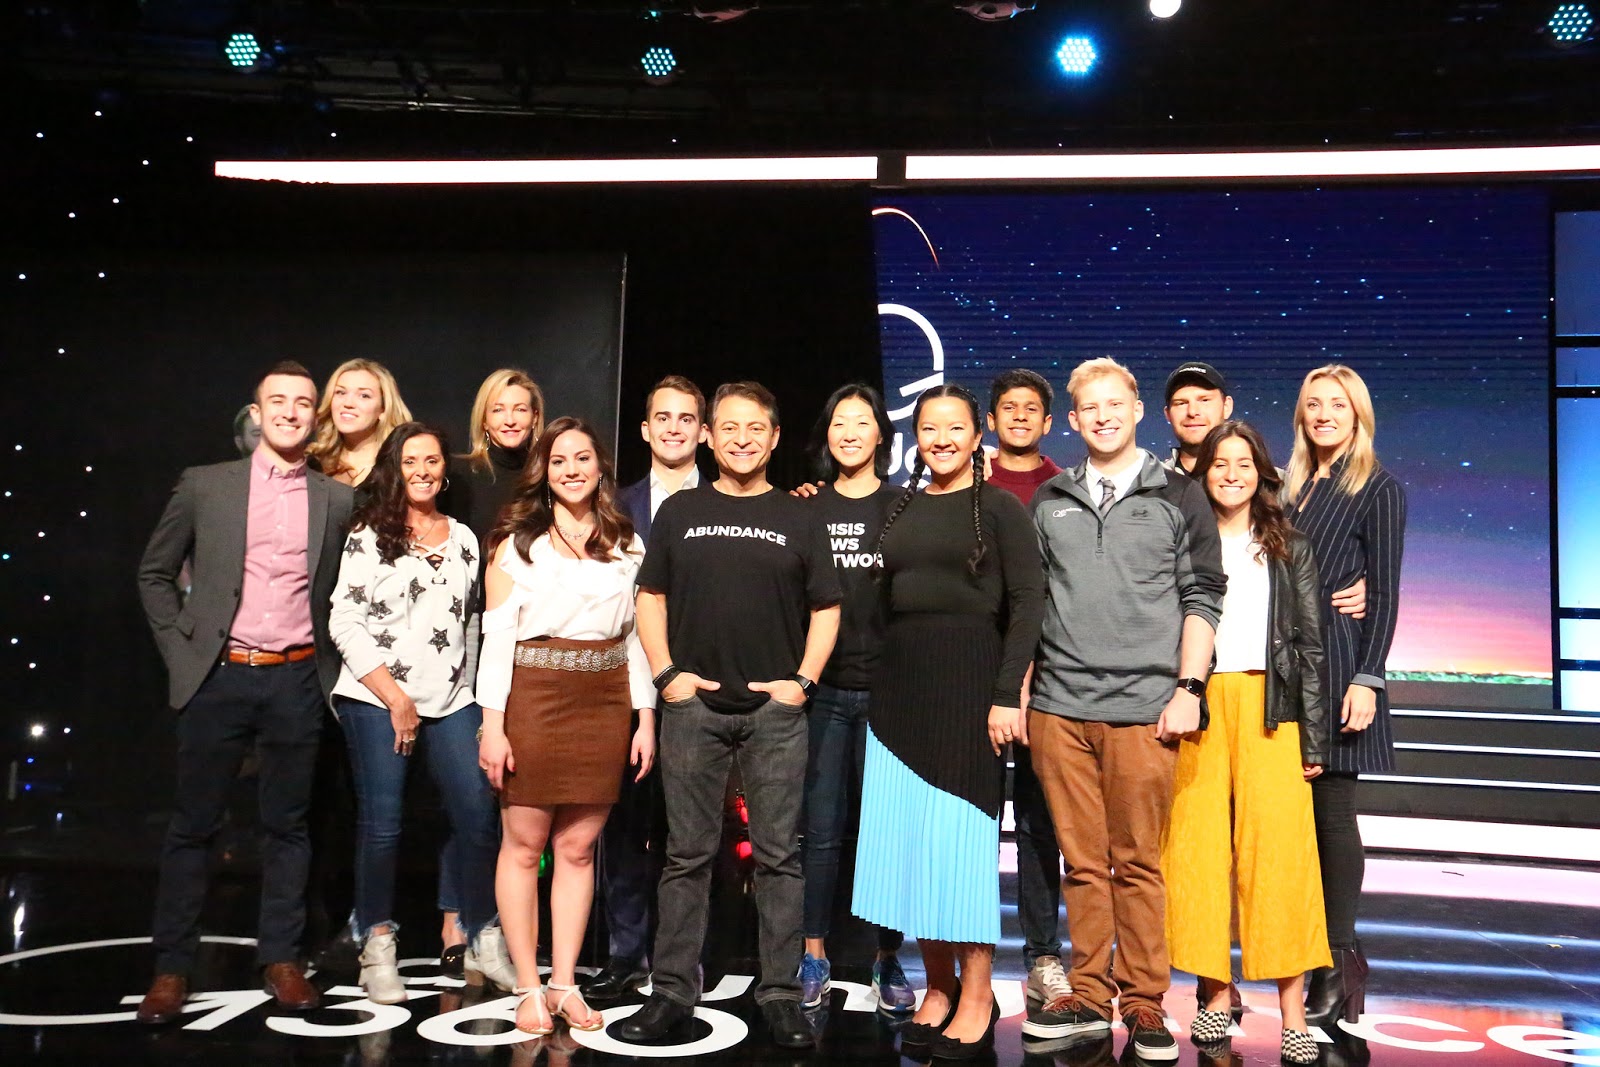 Pictured: Marissa with Peter Diamandis and the Abundance Group